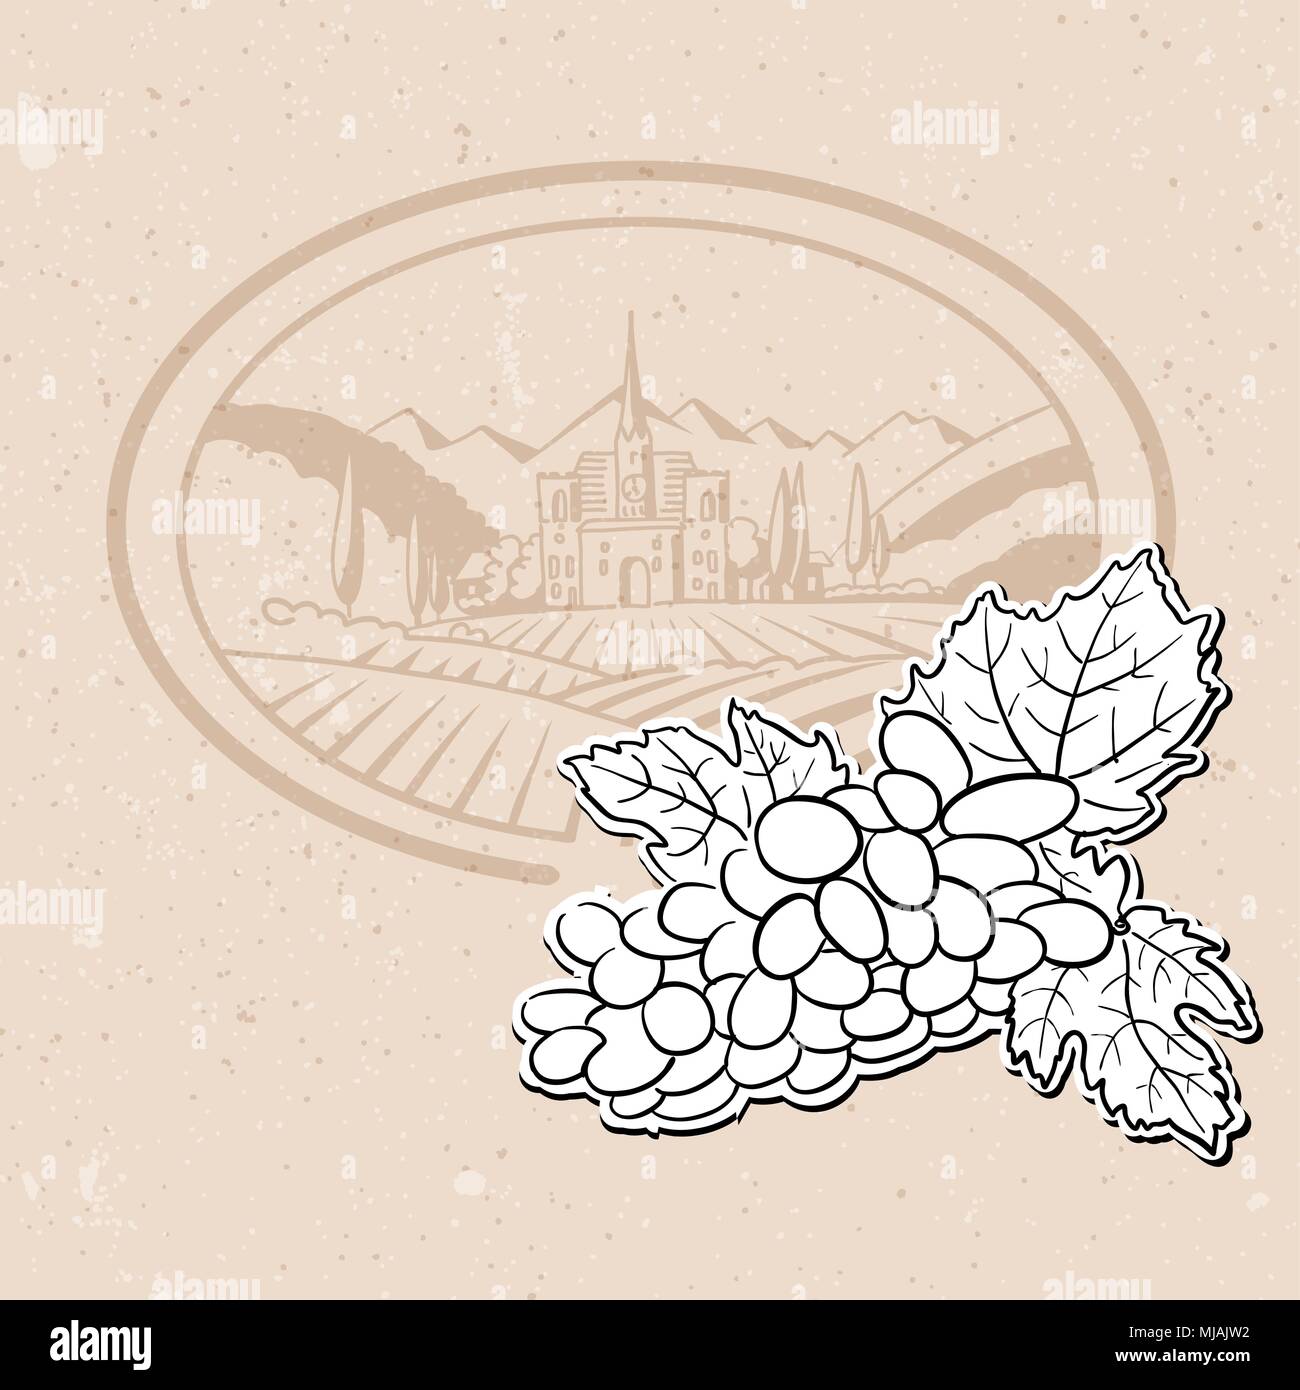 Vineyard and Bunch of Grapes, Background Design Hand drawn Vector Artwork Stock Vector